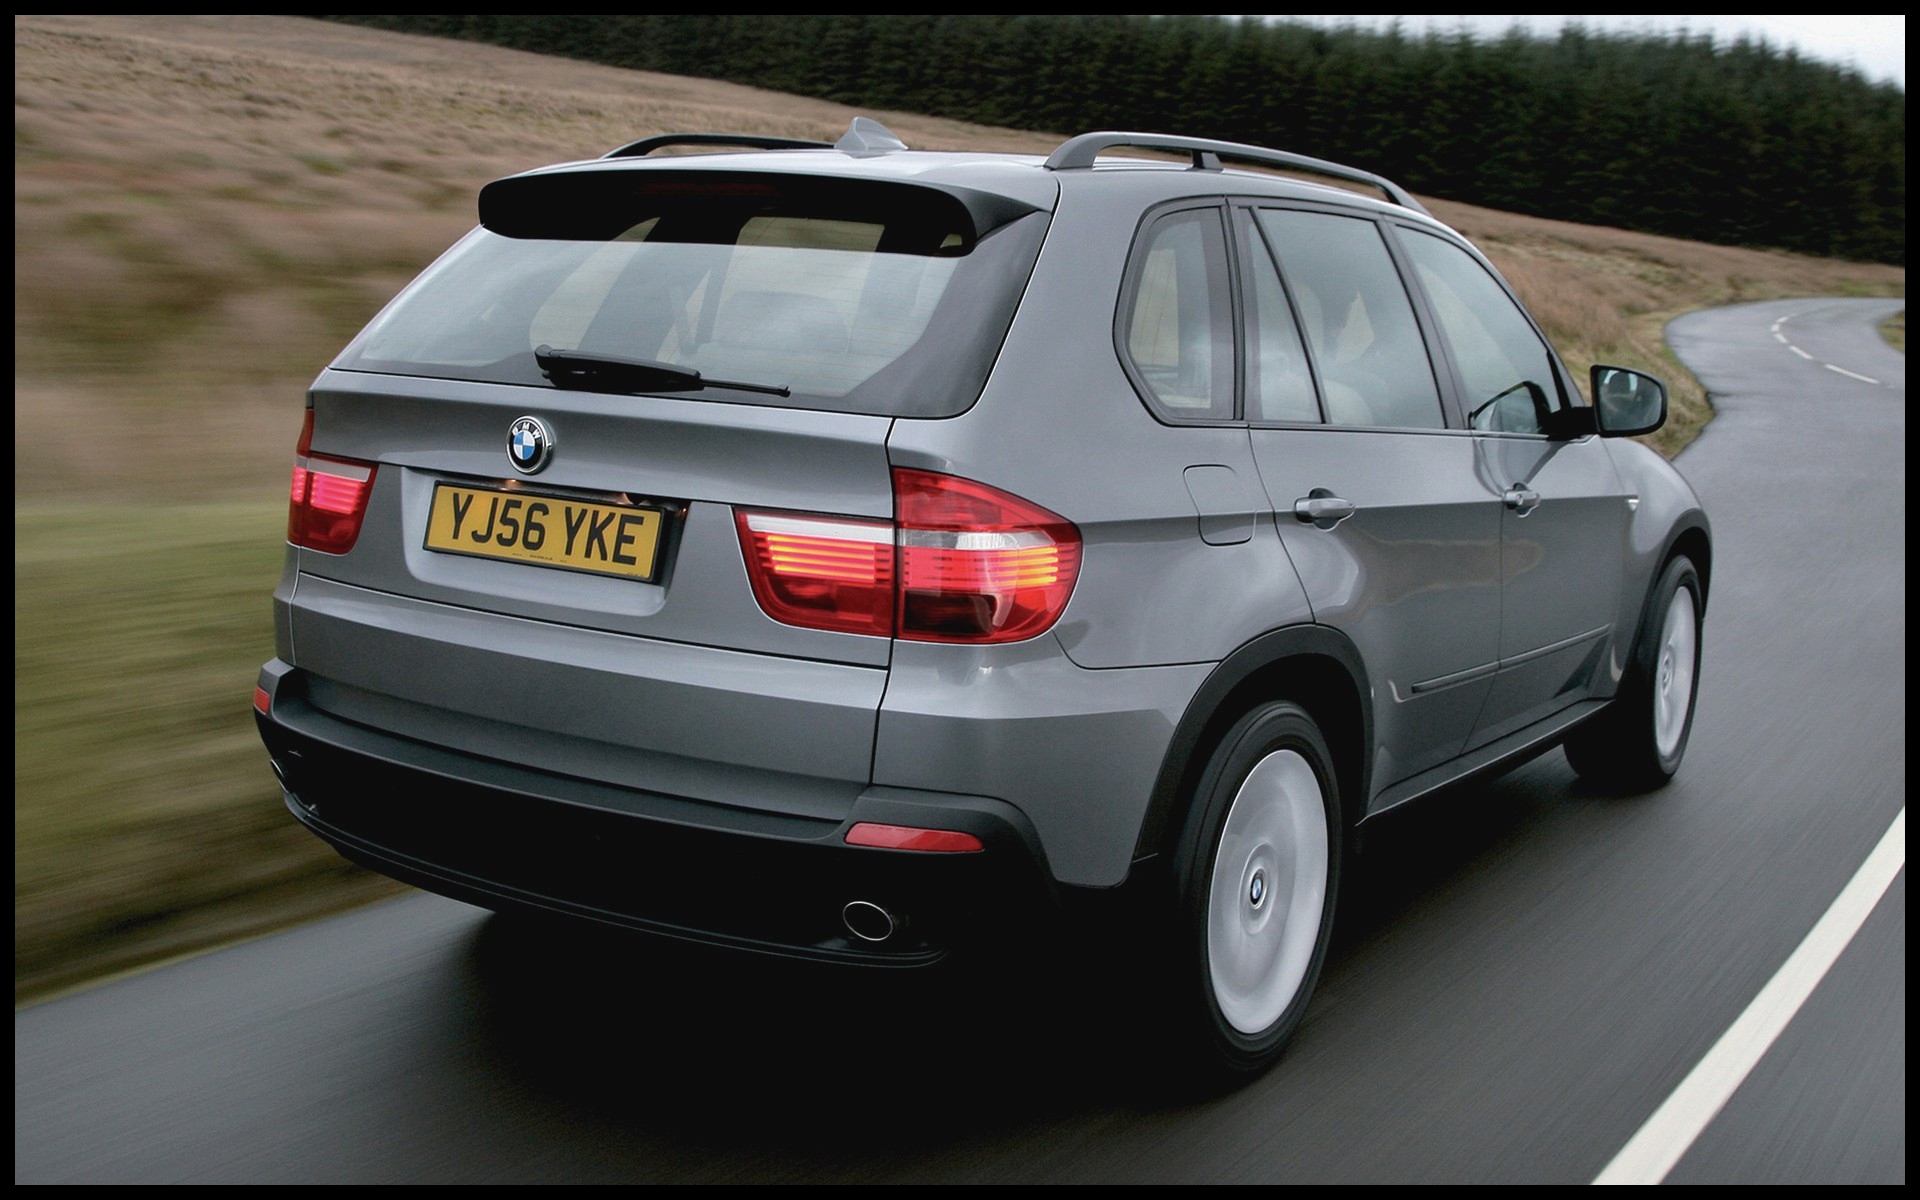 Bmw England Lovely Stylish Bmw X5 3 0d 2007 Uk Wallpapers And Hd Car Image Bmw X4 Wallpaper